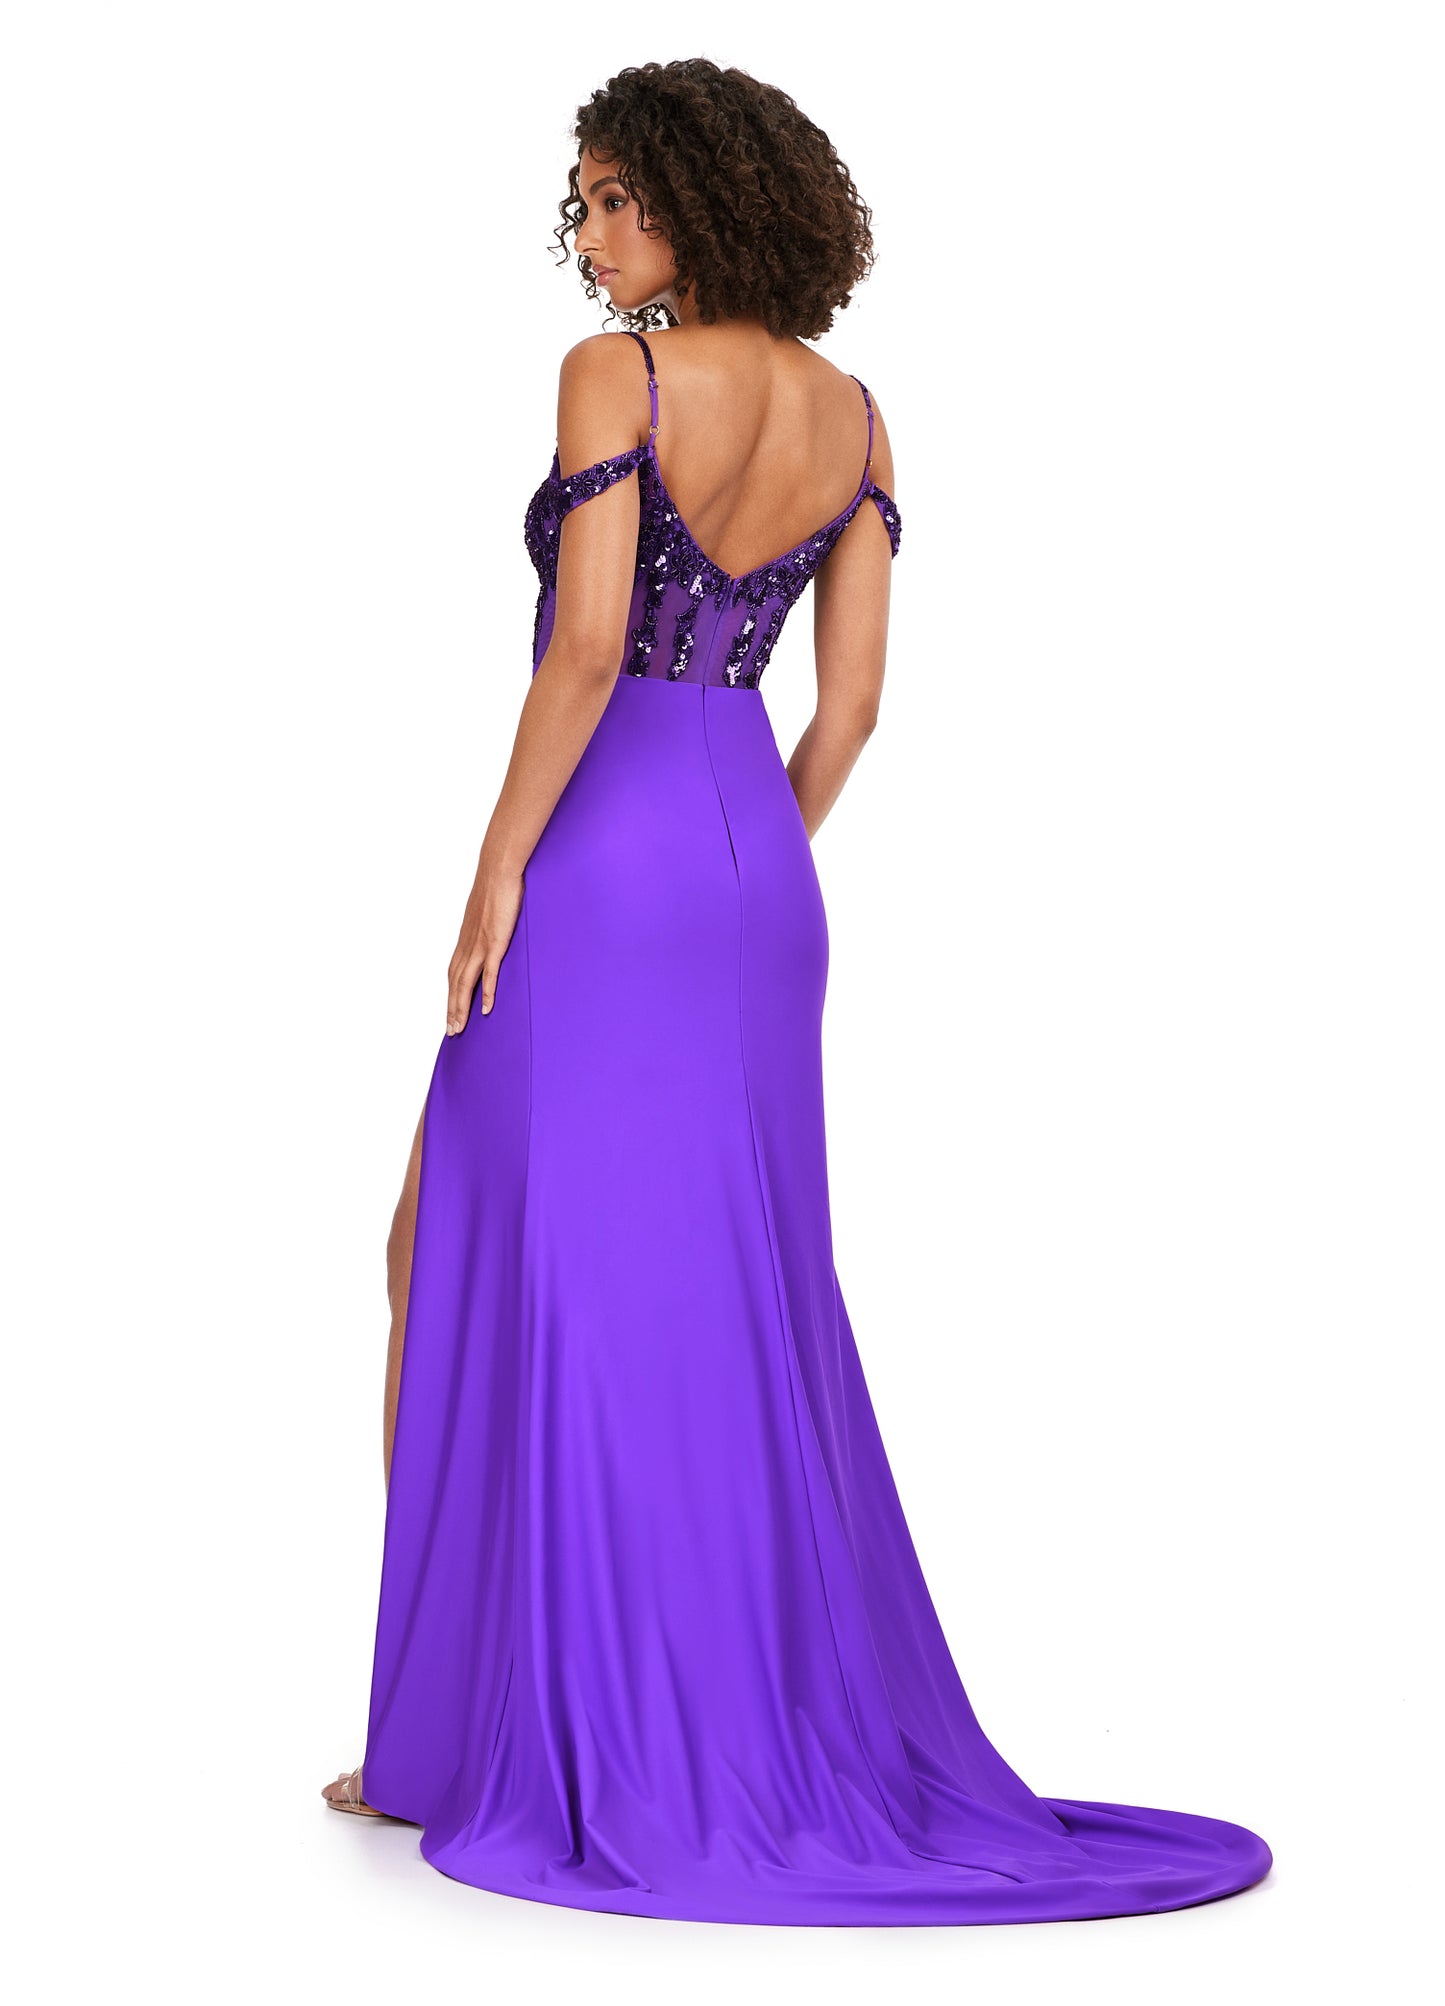 Ashley Lauren 11391 Off The Shoulder WIth Strap Beaded Corset Jersey Gown Formal Dress. All eyes will be on you in this stand out evening dress. This look is complete with a beaded corset, off shoulder straps and a jersey skirt.